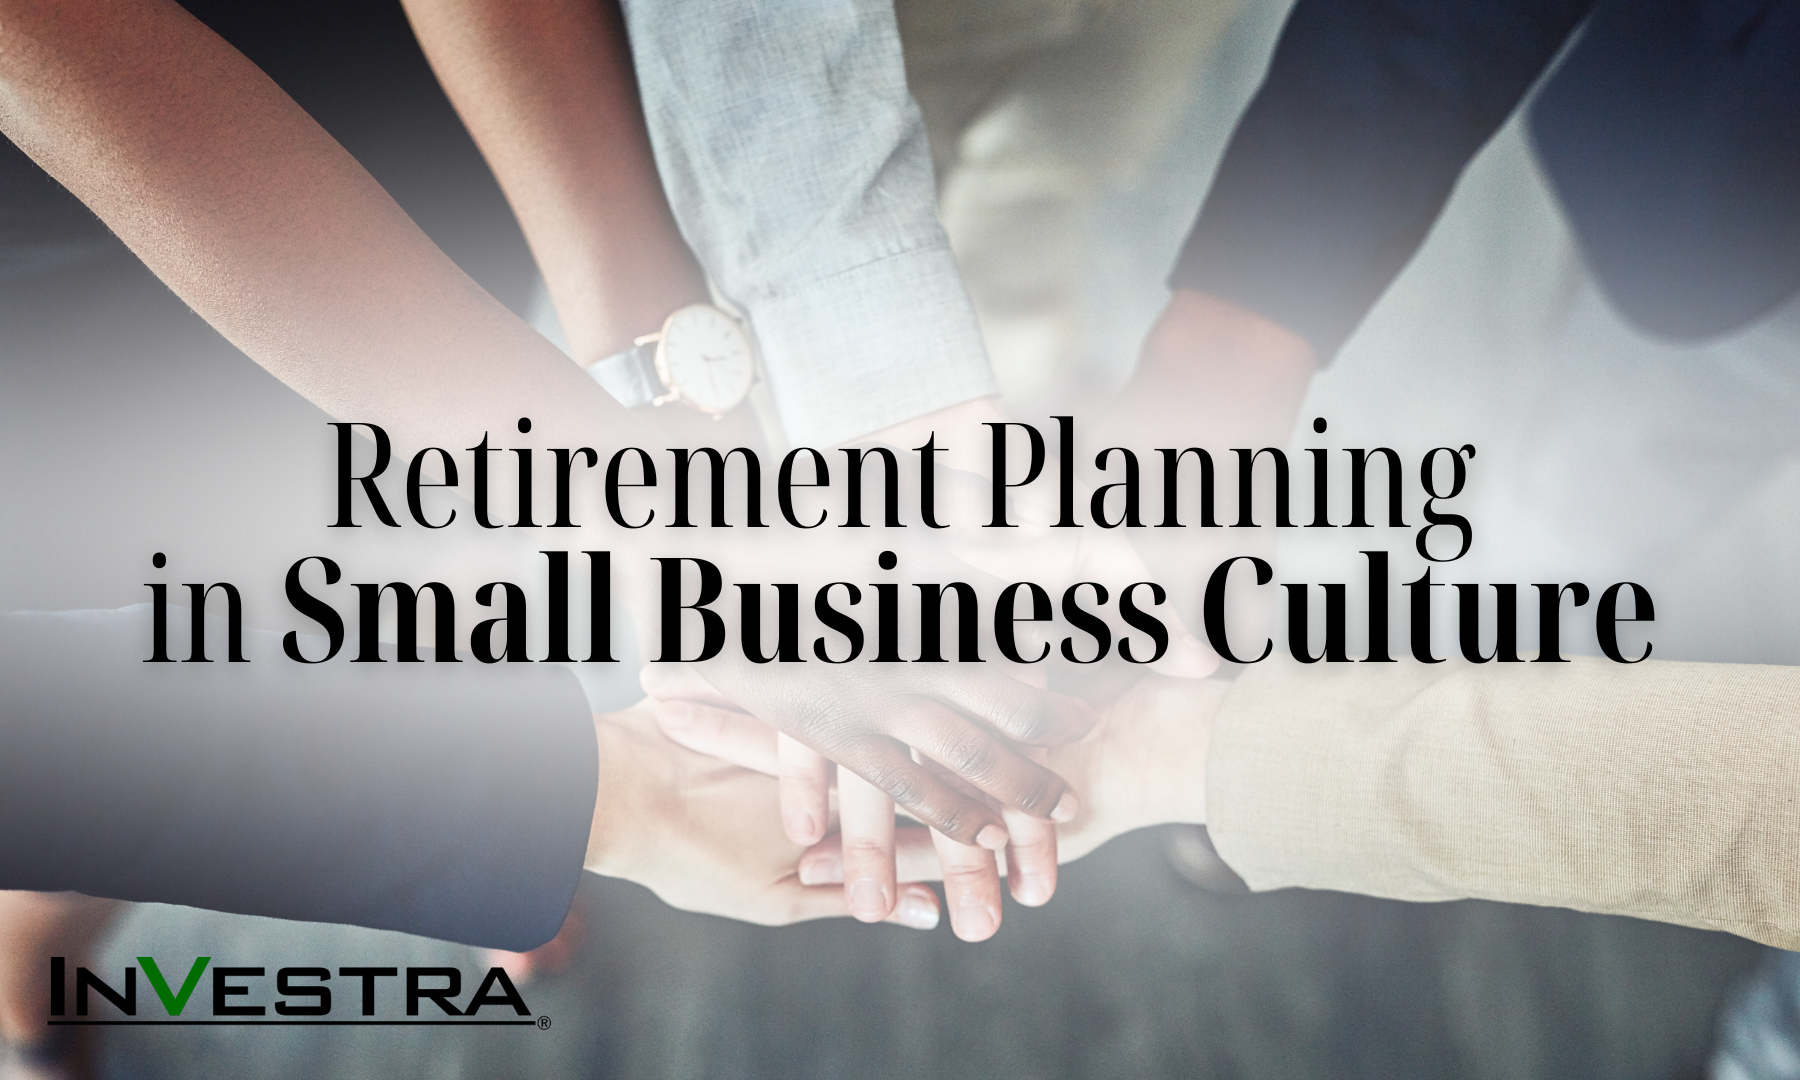 Retirement Planning for Women With Small Businesses